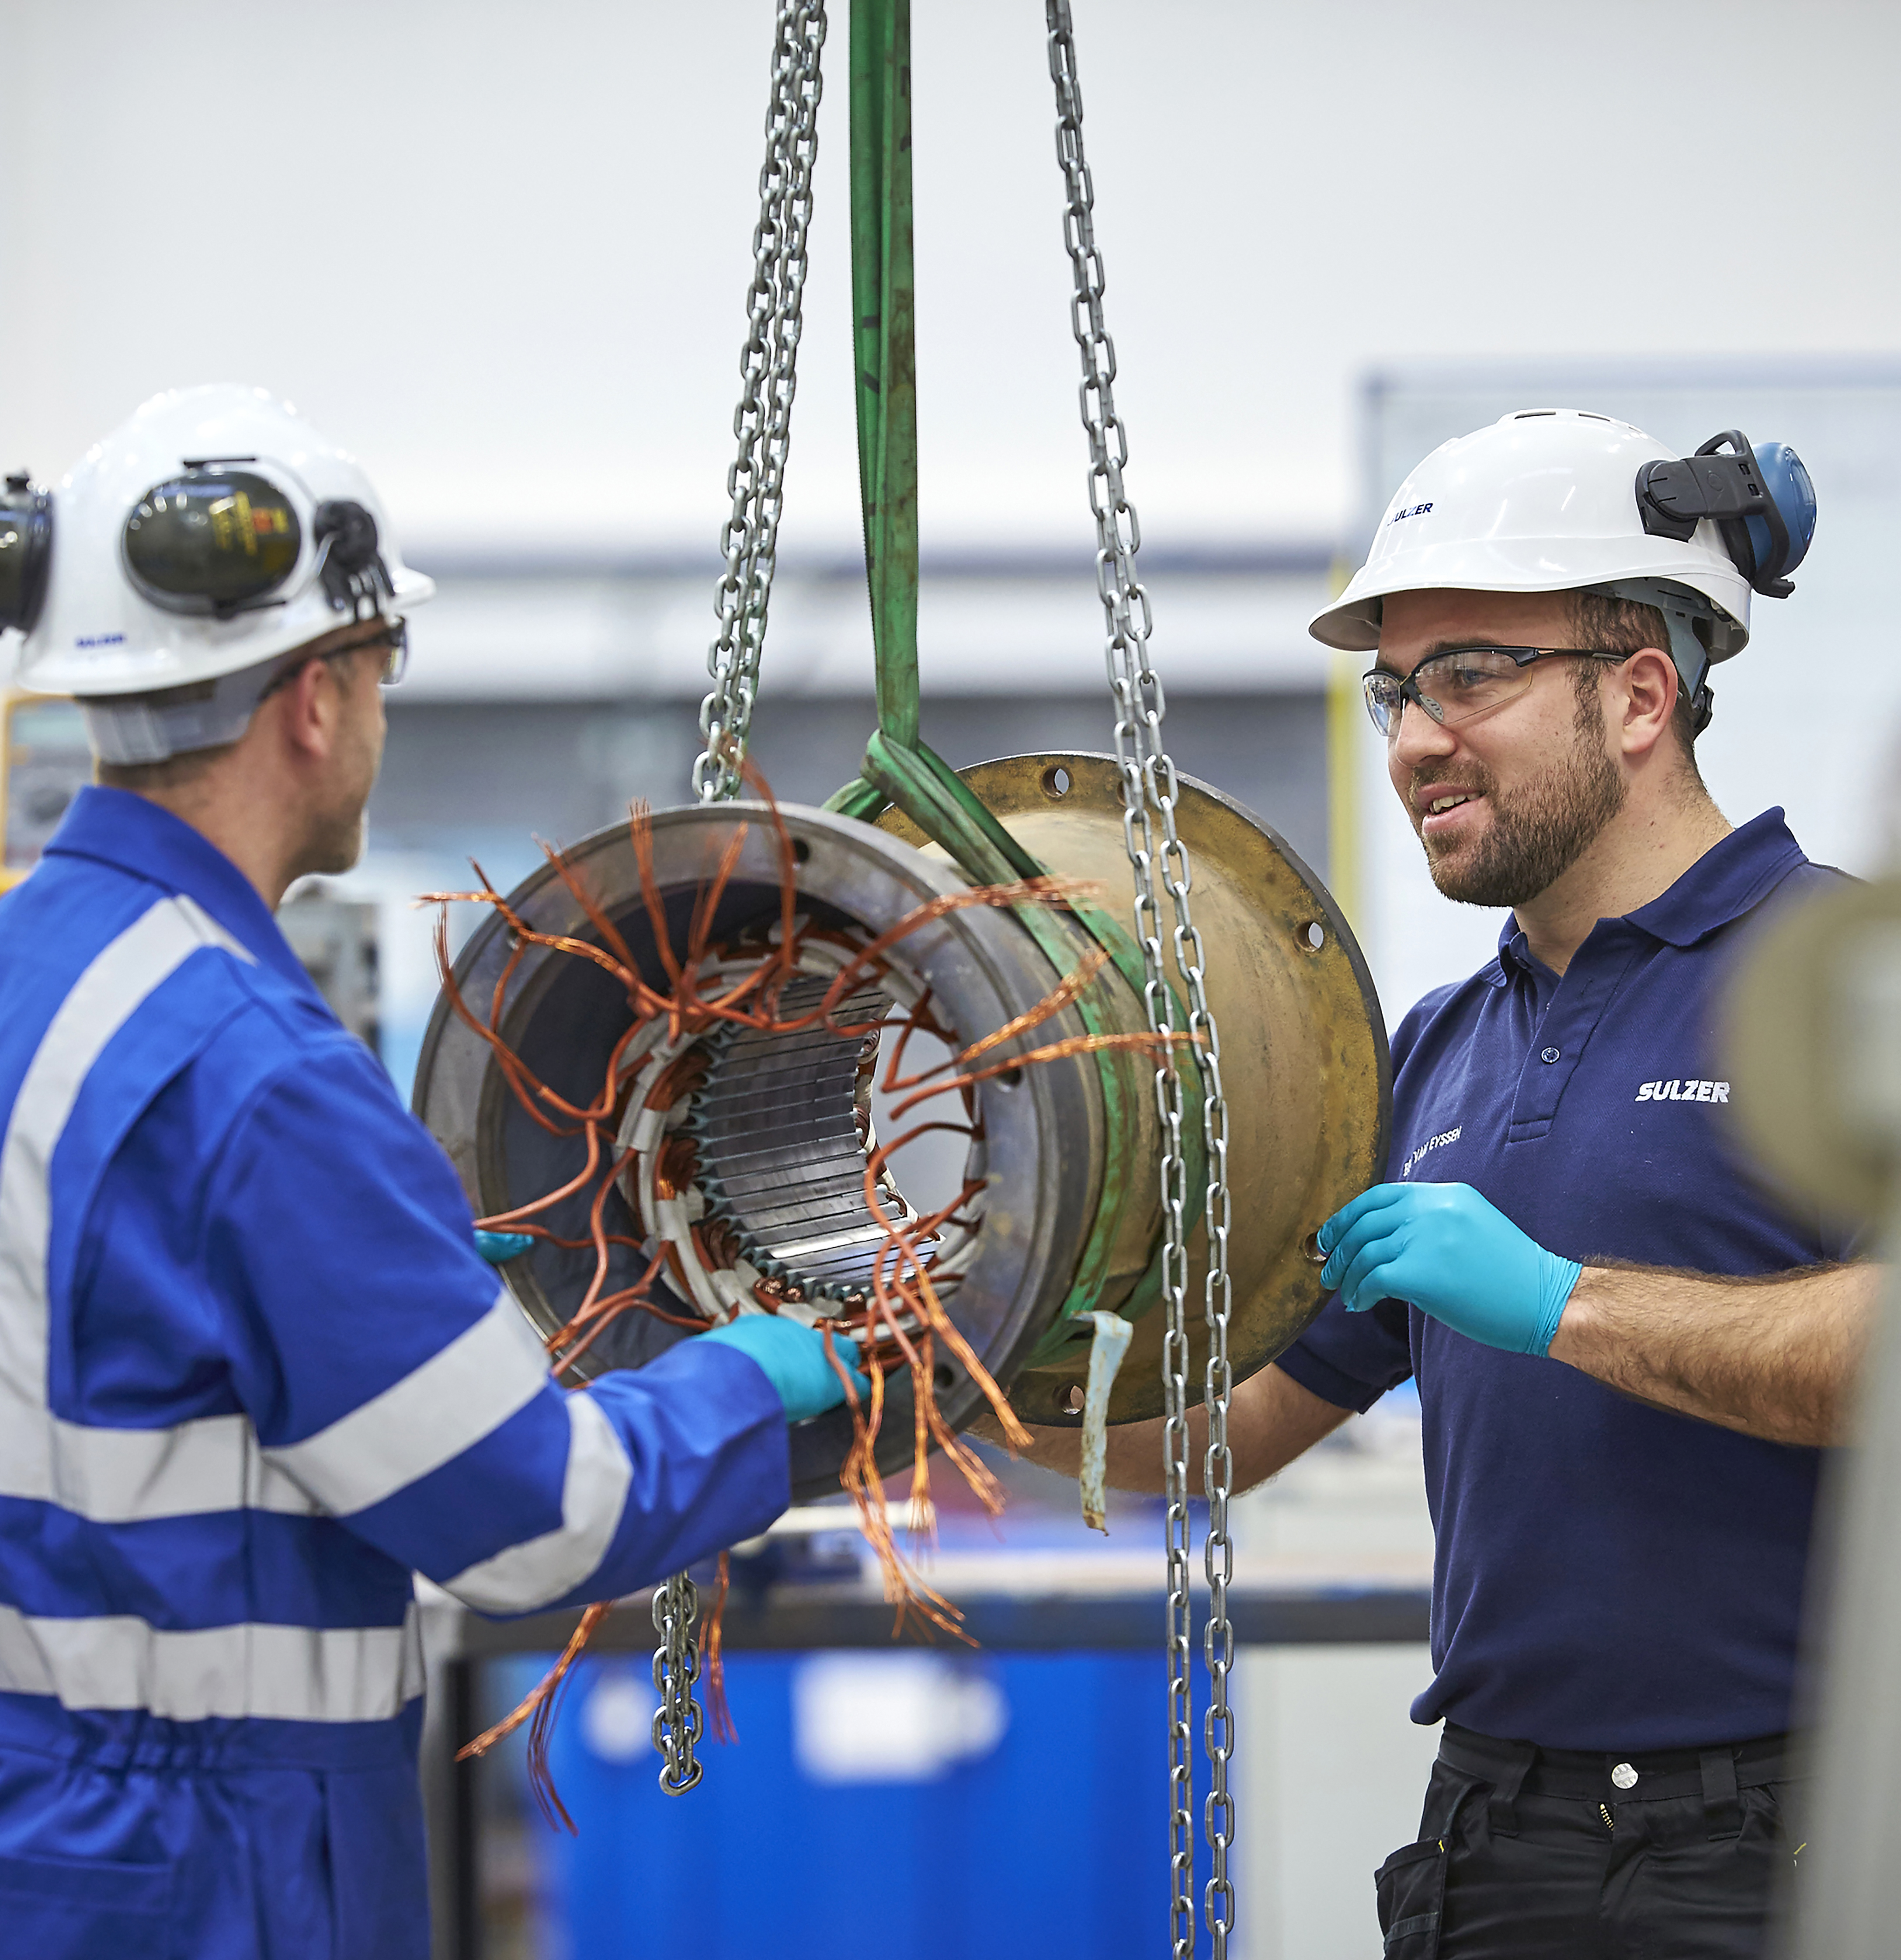 Sulzer provides full train support for the sector with a service portfolio combing pumps, compressors, turbines, and generators